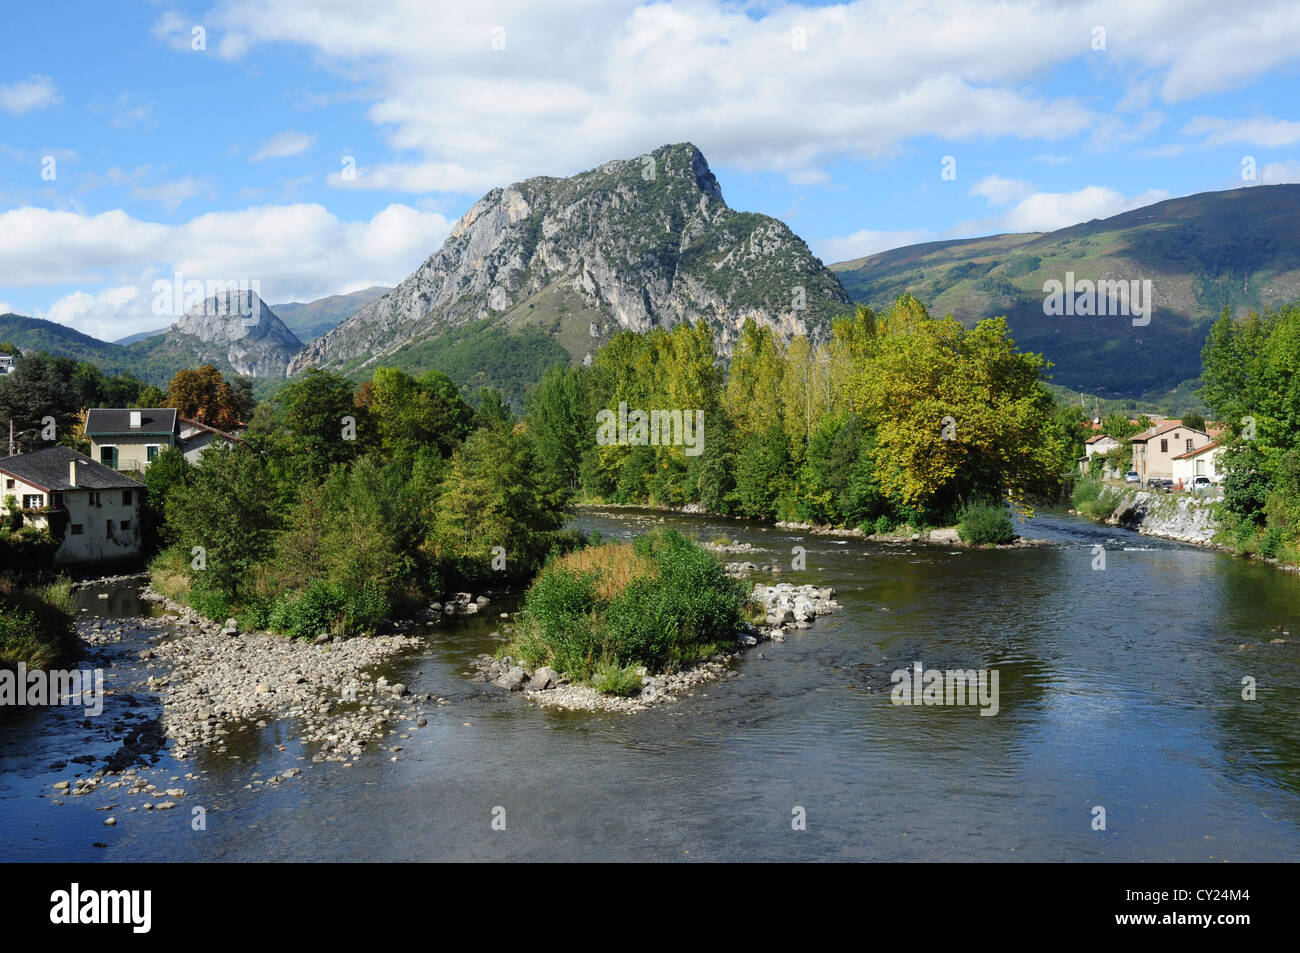 Overview of river and countryside, Tarascon-sur-Ariege, Ariege, Midi-Pyrenees, France Stock Photo